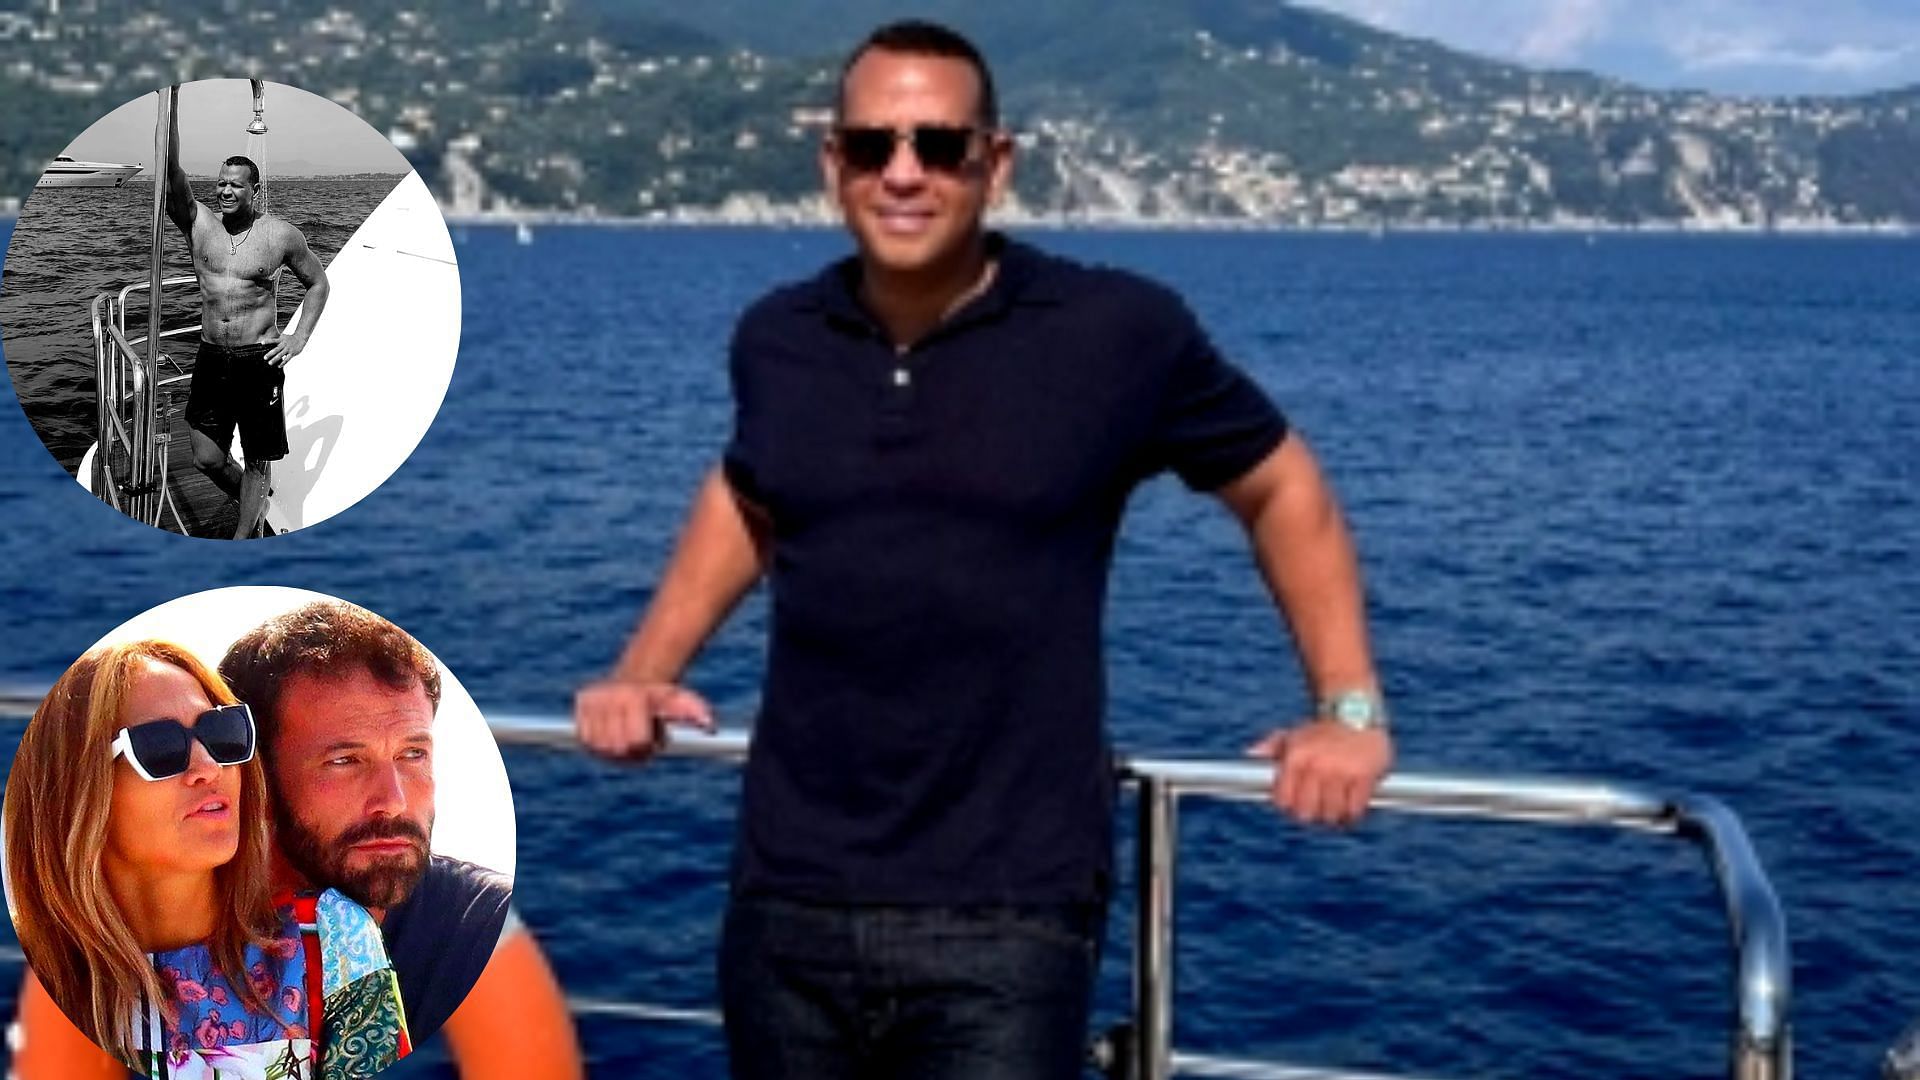 Alex Rodriguez in St. Tropez; J.Lo with Ben Affleck in St. Tropez (bottom left inset); A-Rod taking a shower on his yacht in St. Tropez (upper left inset).